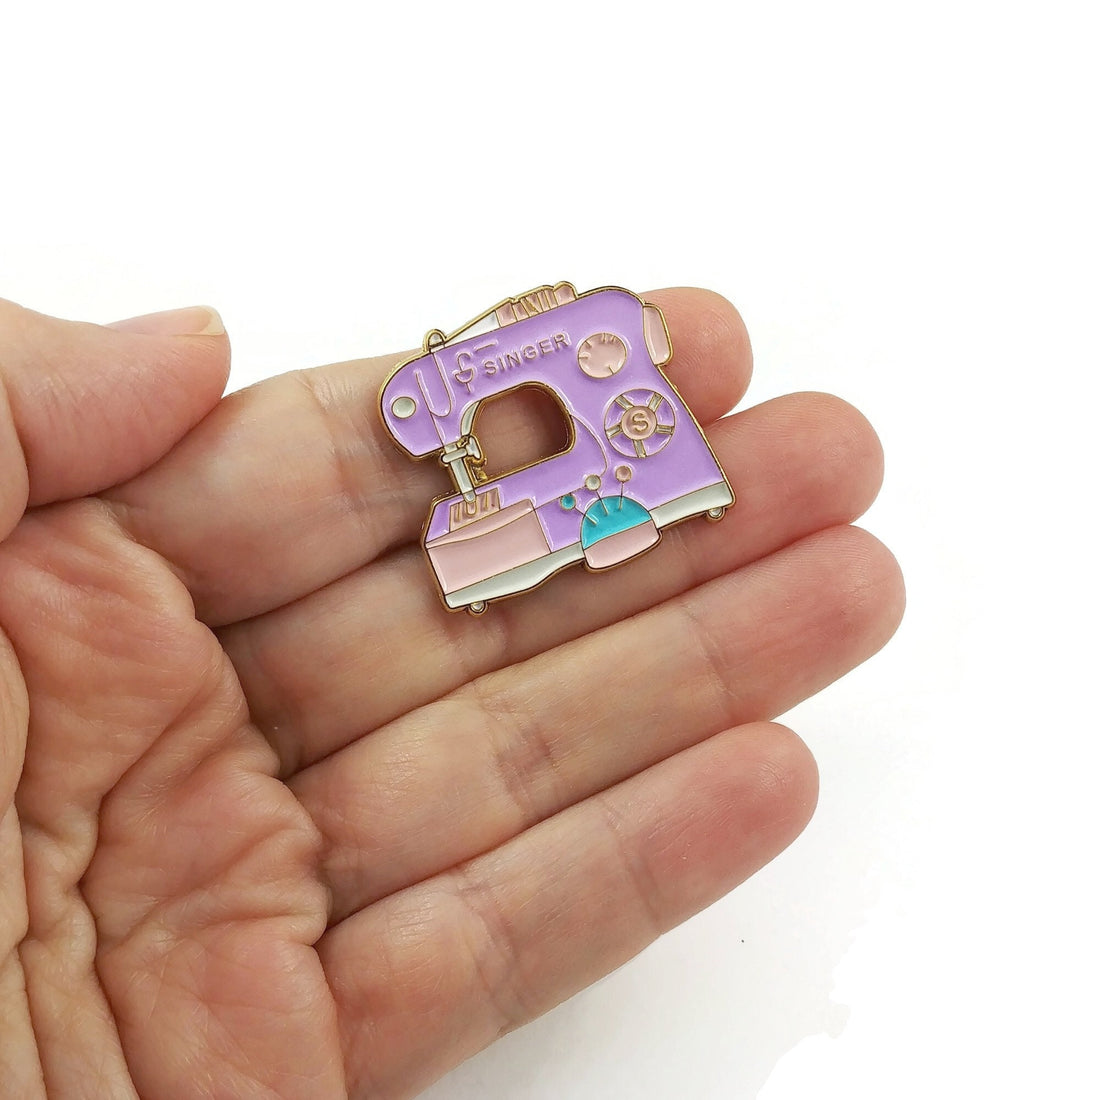 Sewing machine enamel pin, Sew lover brooch, Cute gift for her